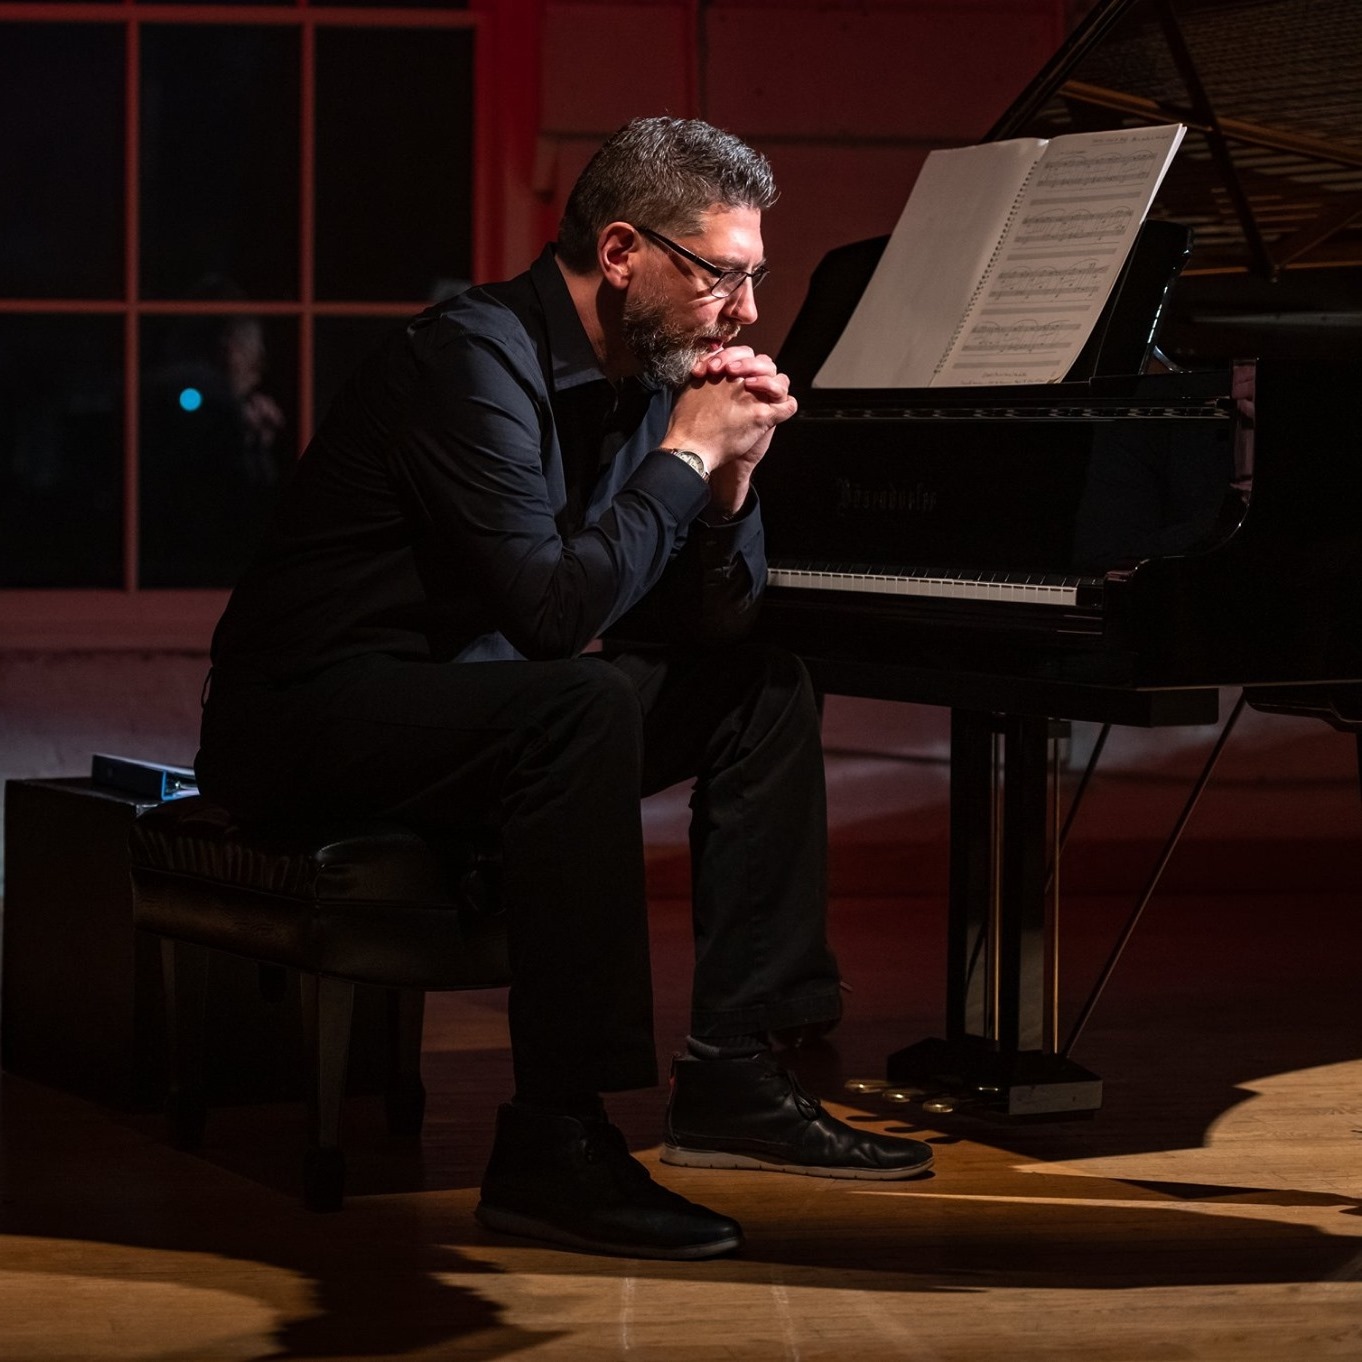 A picture of Chris Foley sitting at a Bosendorfer grand piano.